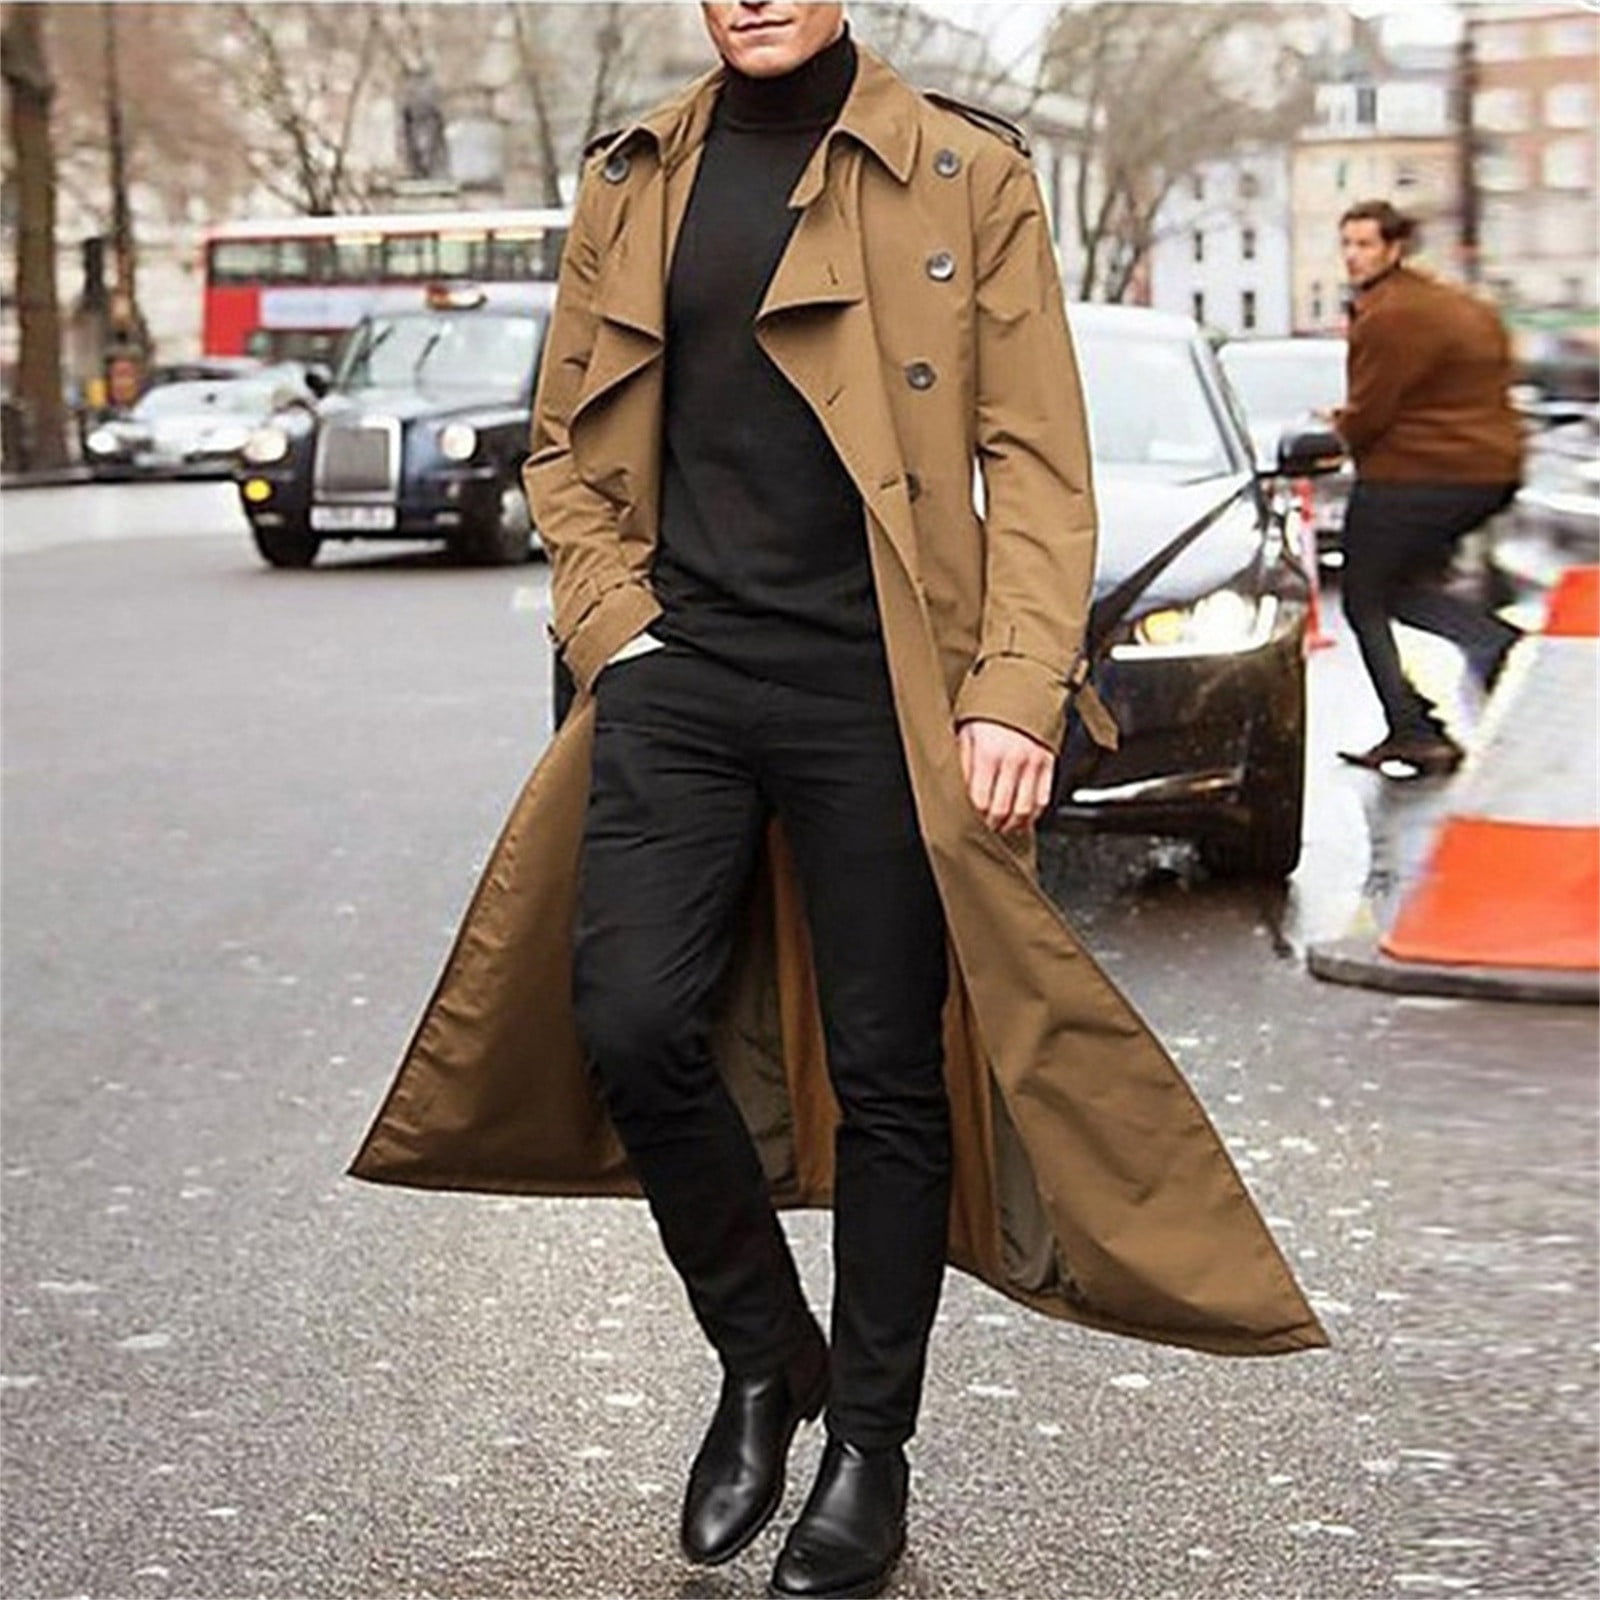 Chiccall Mens Trench Coat Simple Solid Pea Coat Winter Long Doubkle Breasted  Classic Stylish Casual Business Overcoat on Clearance 